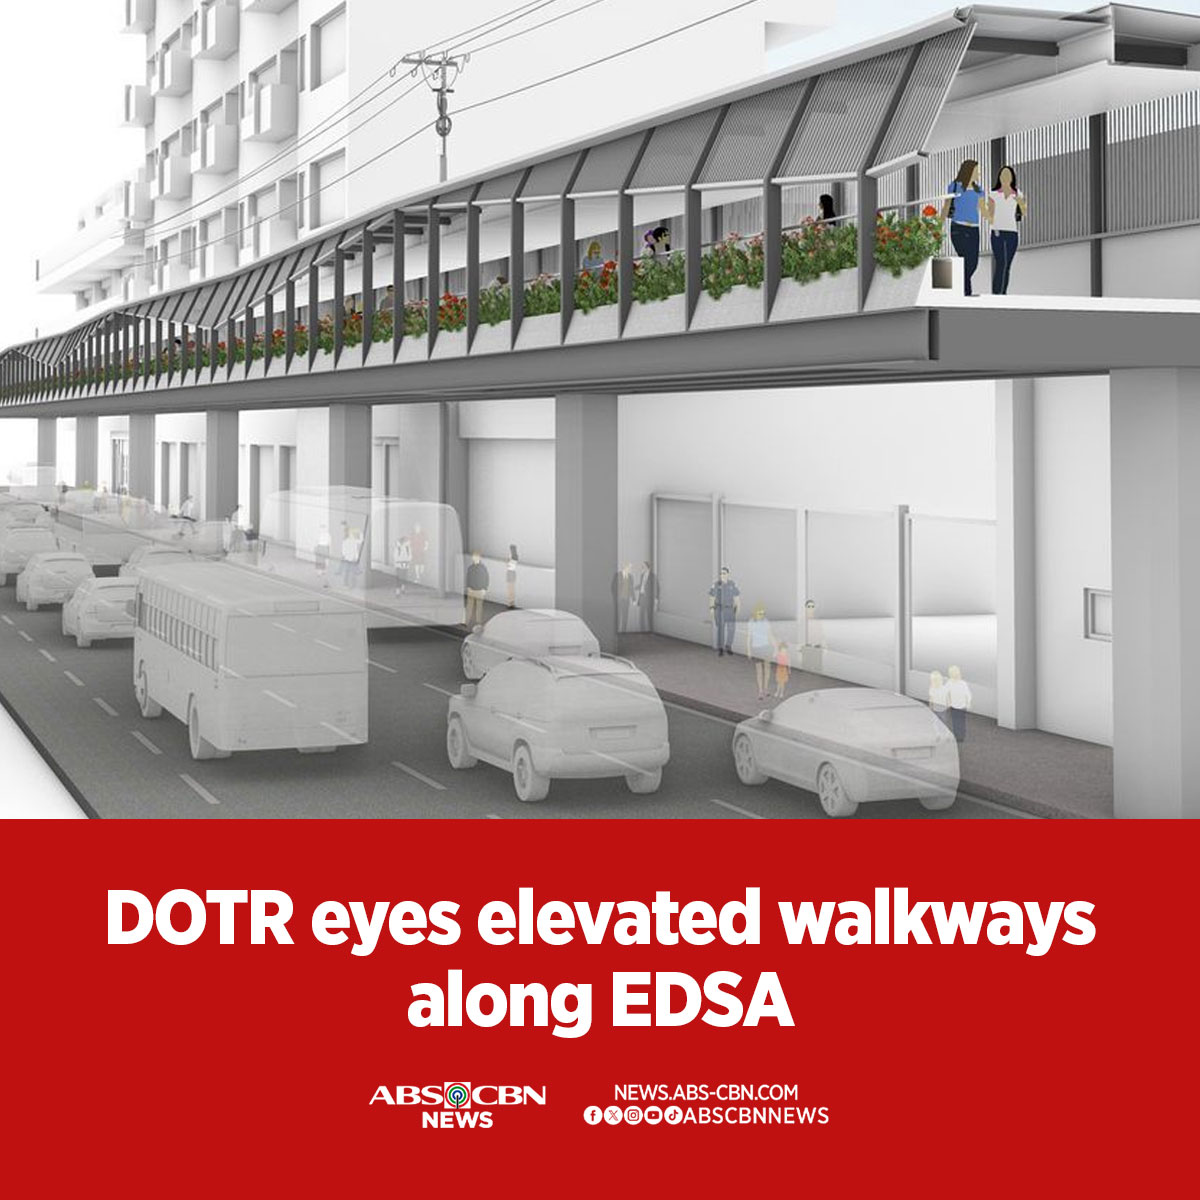 The Department of Transportation is planning to improve walkways along EDSA by elevating parts where foot traffic is heaviest, a transport official said. READ: news.abs-cbn.com/business/2024/…